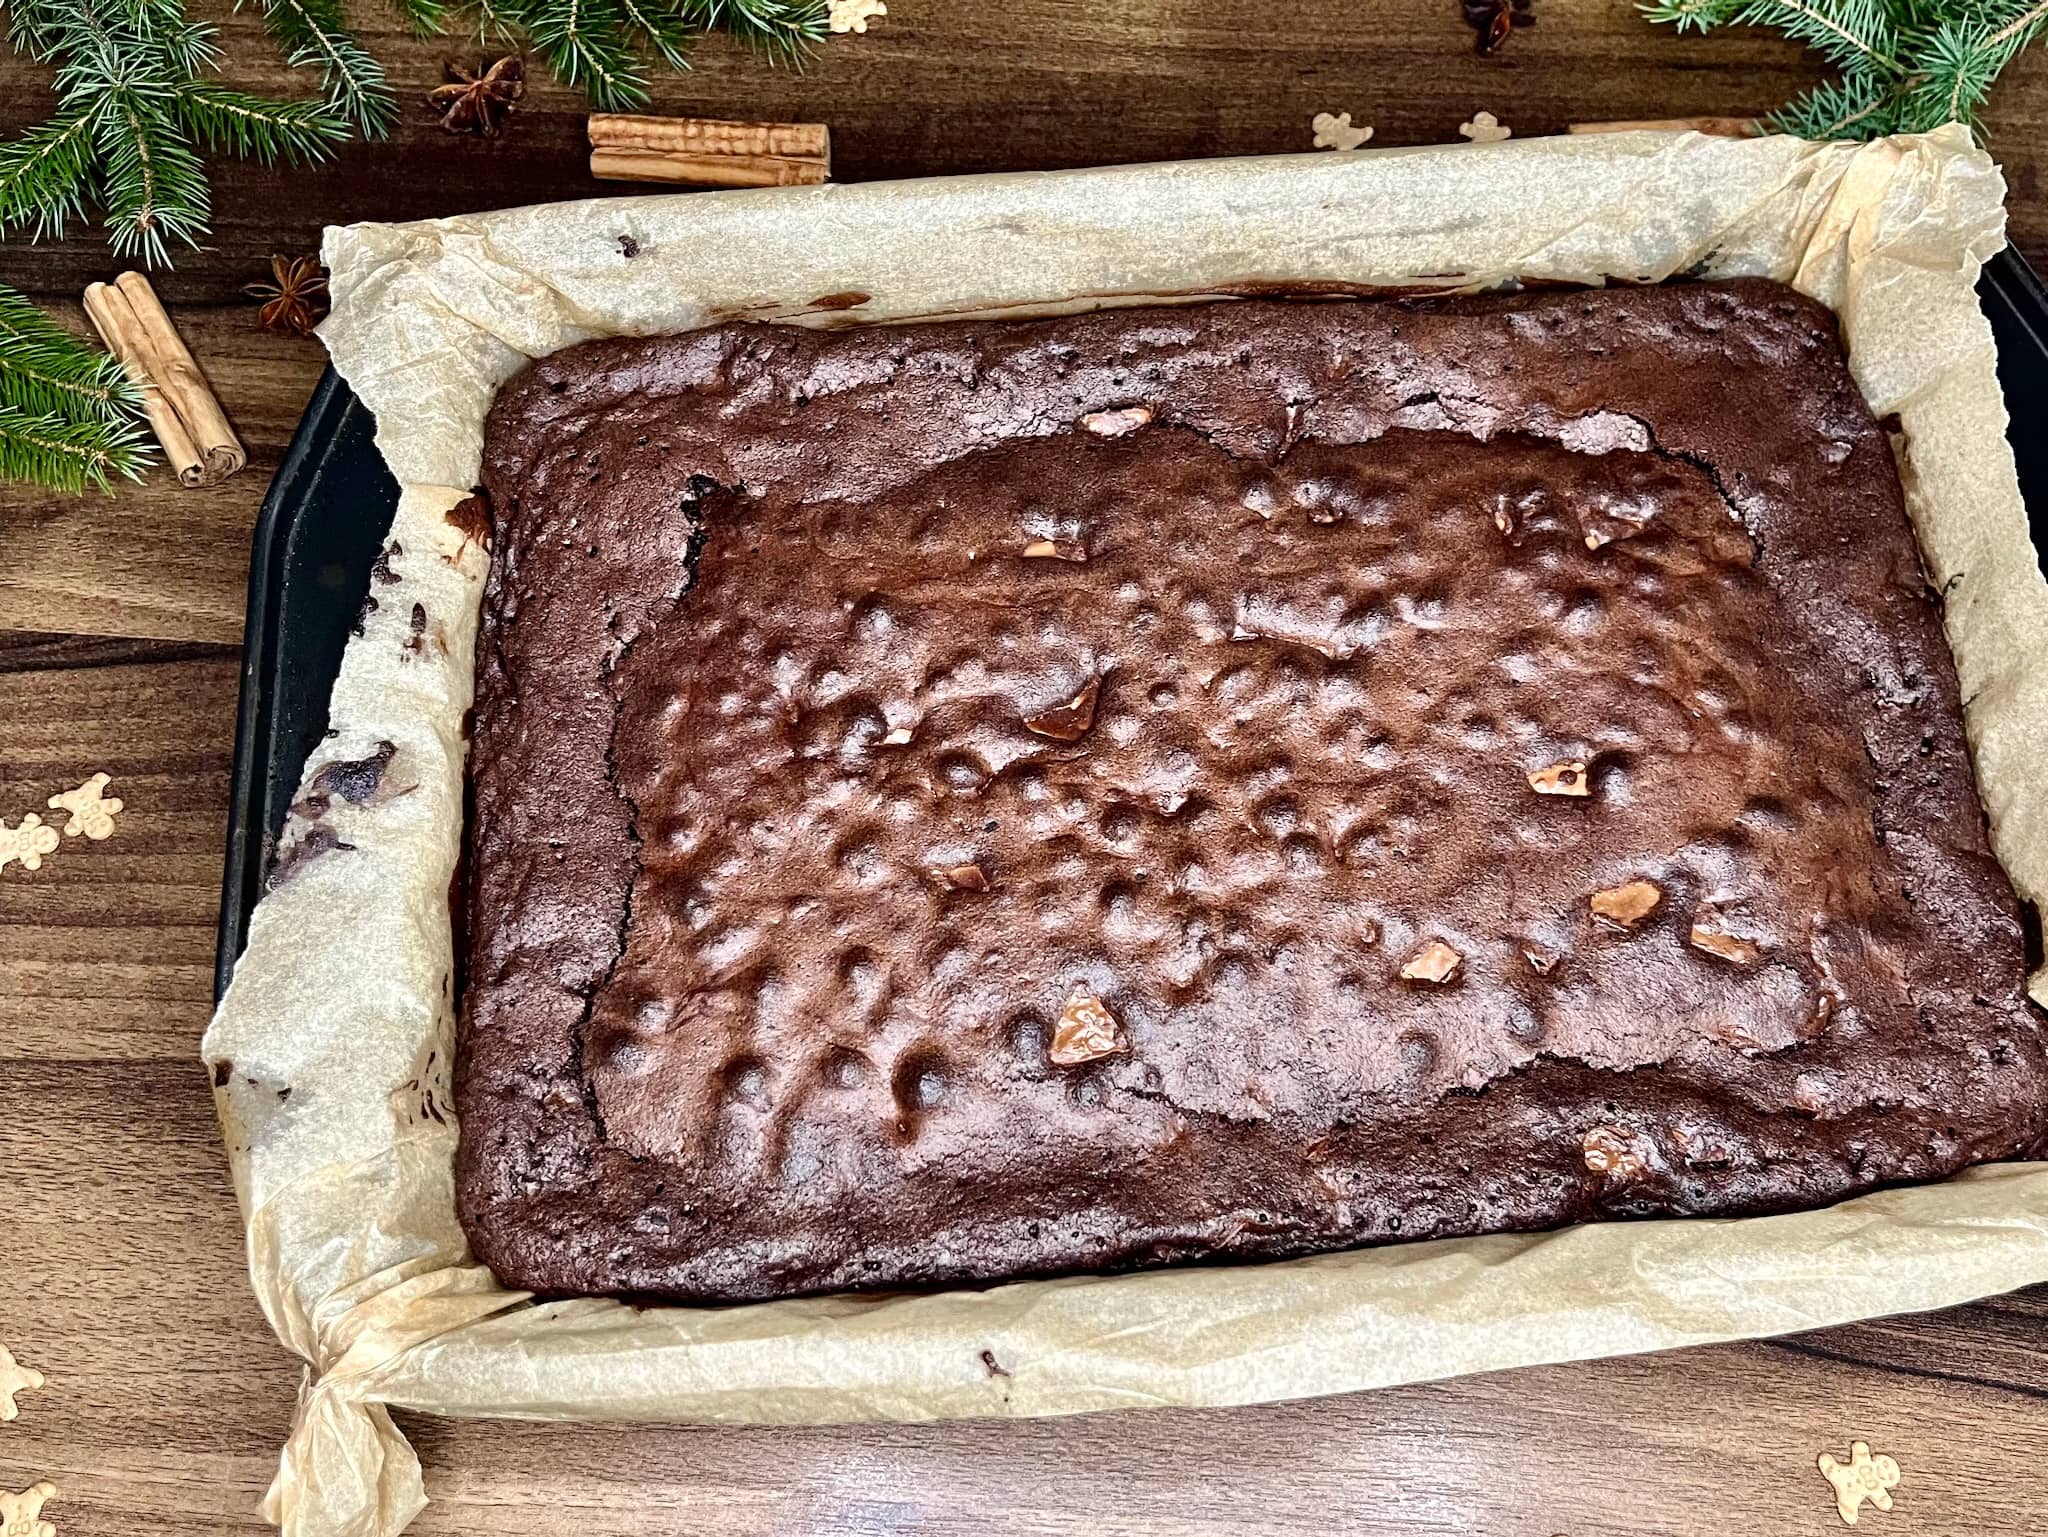 A perfectly baked Gingerbread Brownie, still warm and gooey, nestled snugly in its baking tray